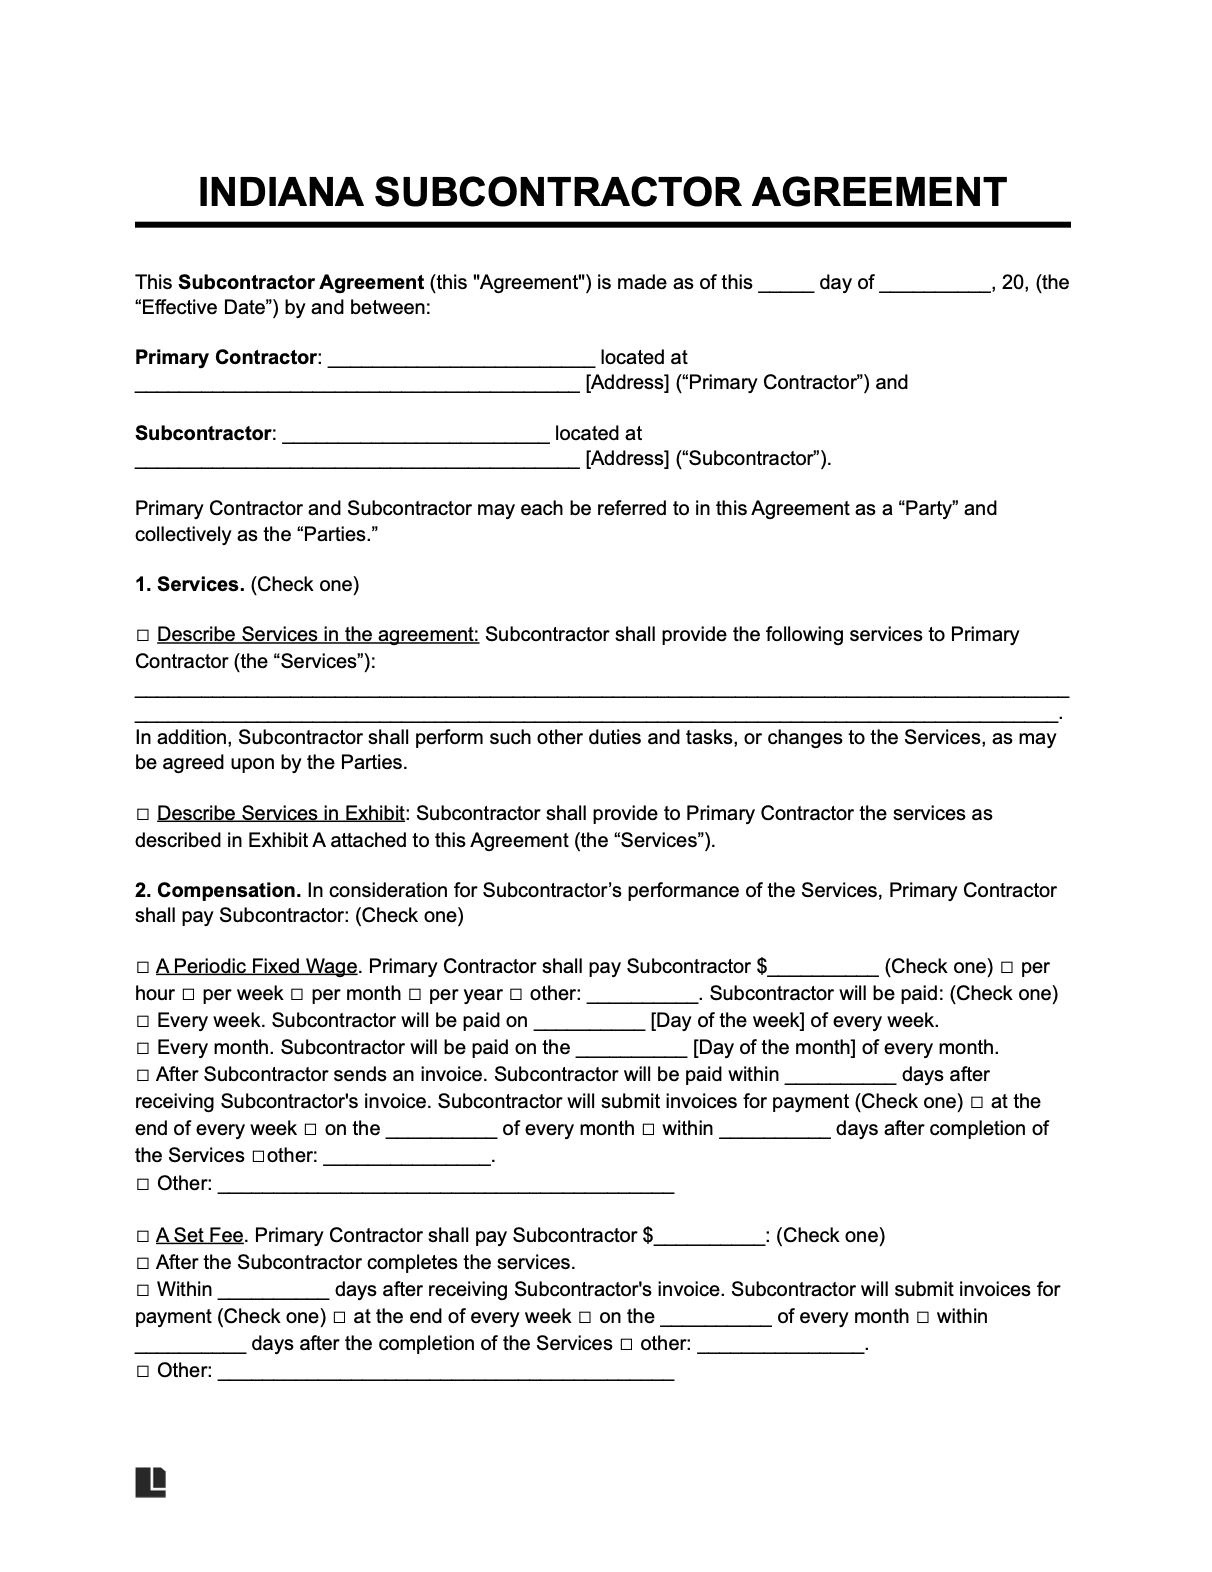 indiana subcontractor agreement template